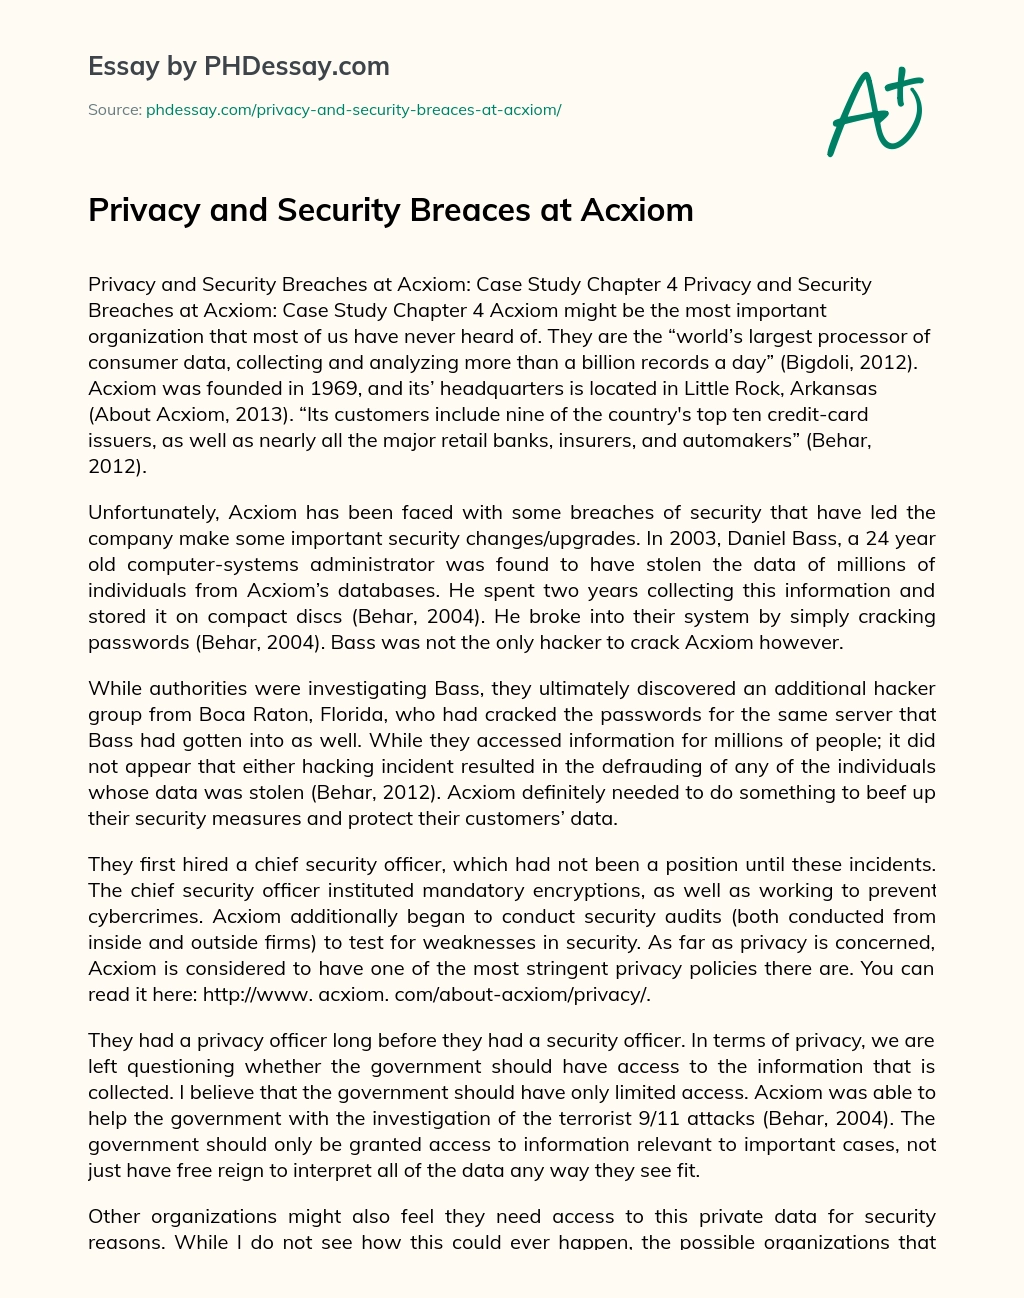 Privacy and Security Breaces at Acxiom essay